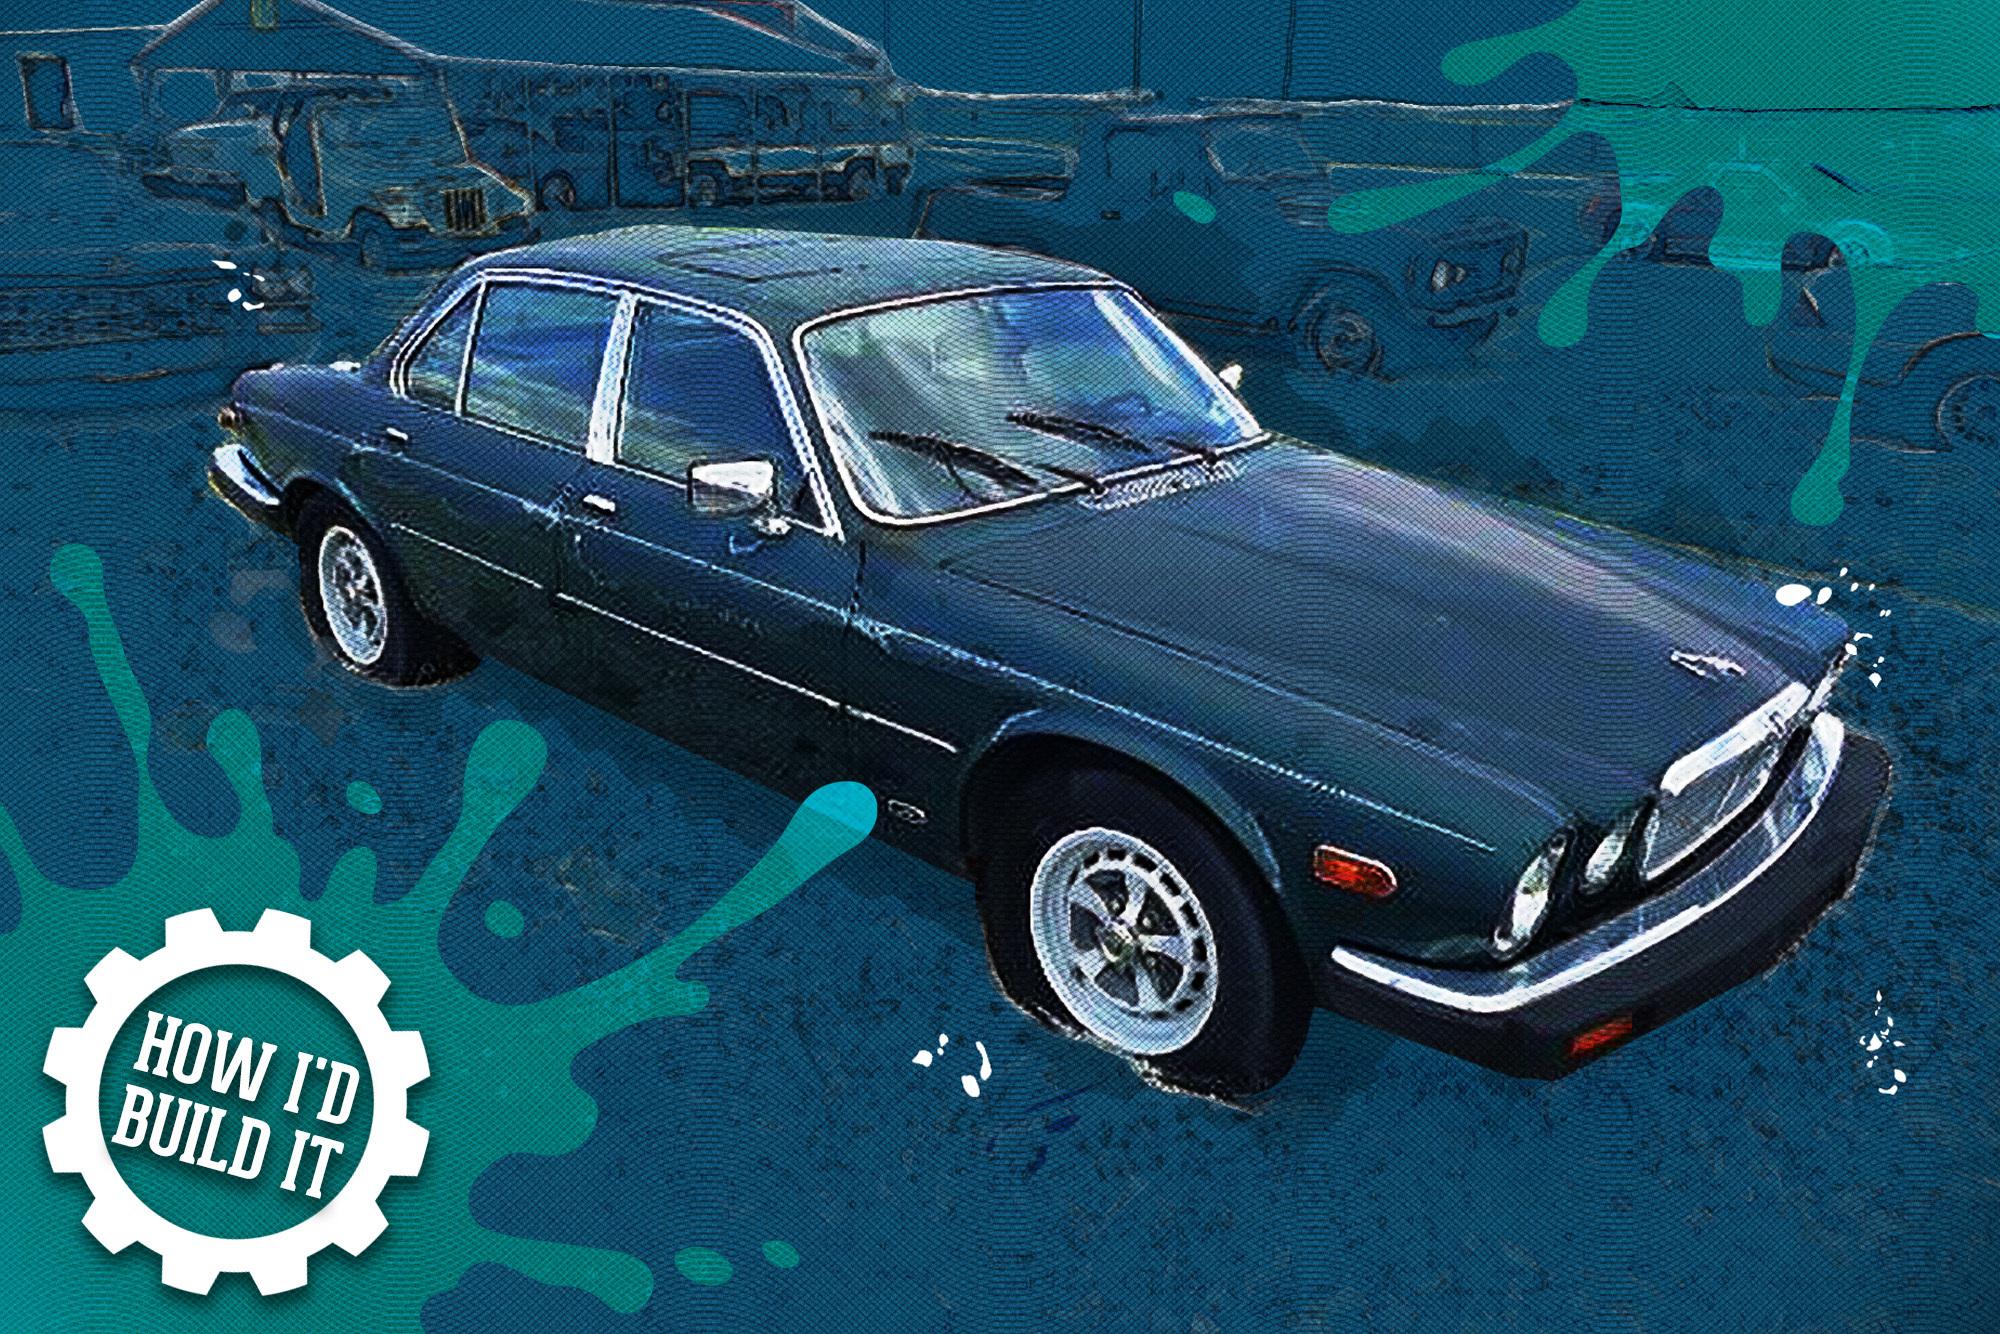 The luxurious Series III Jaguar XJ6 could be made sporty: Here's how I'd build it